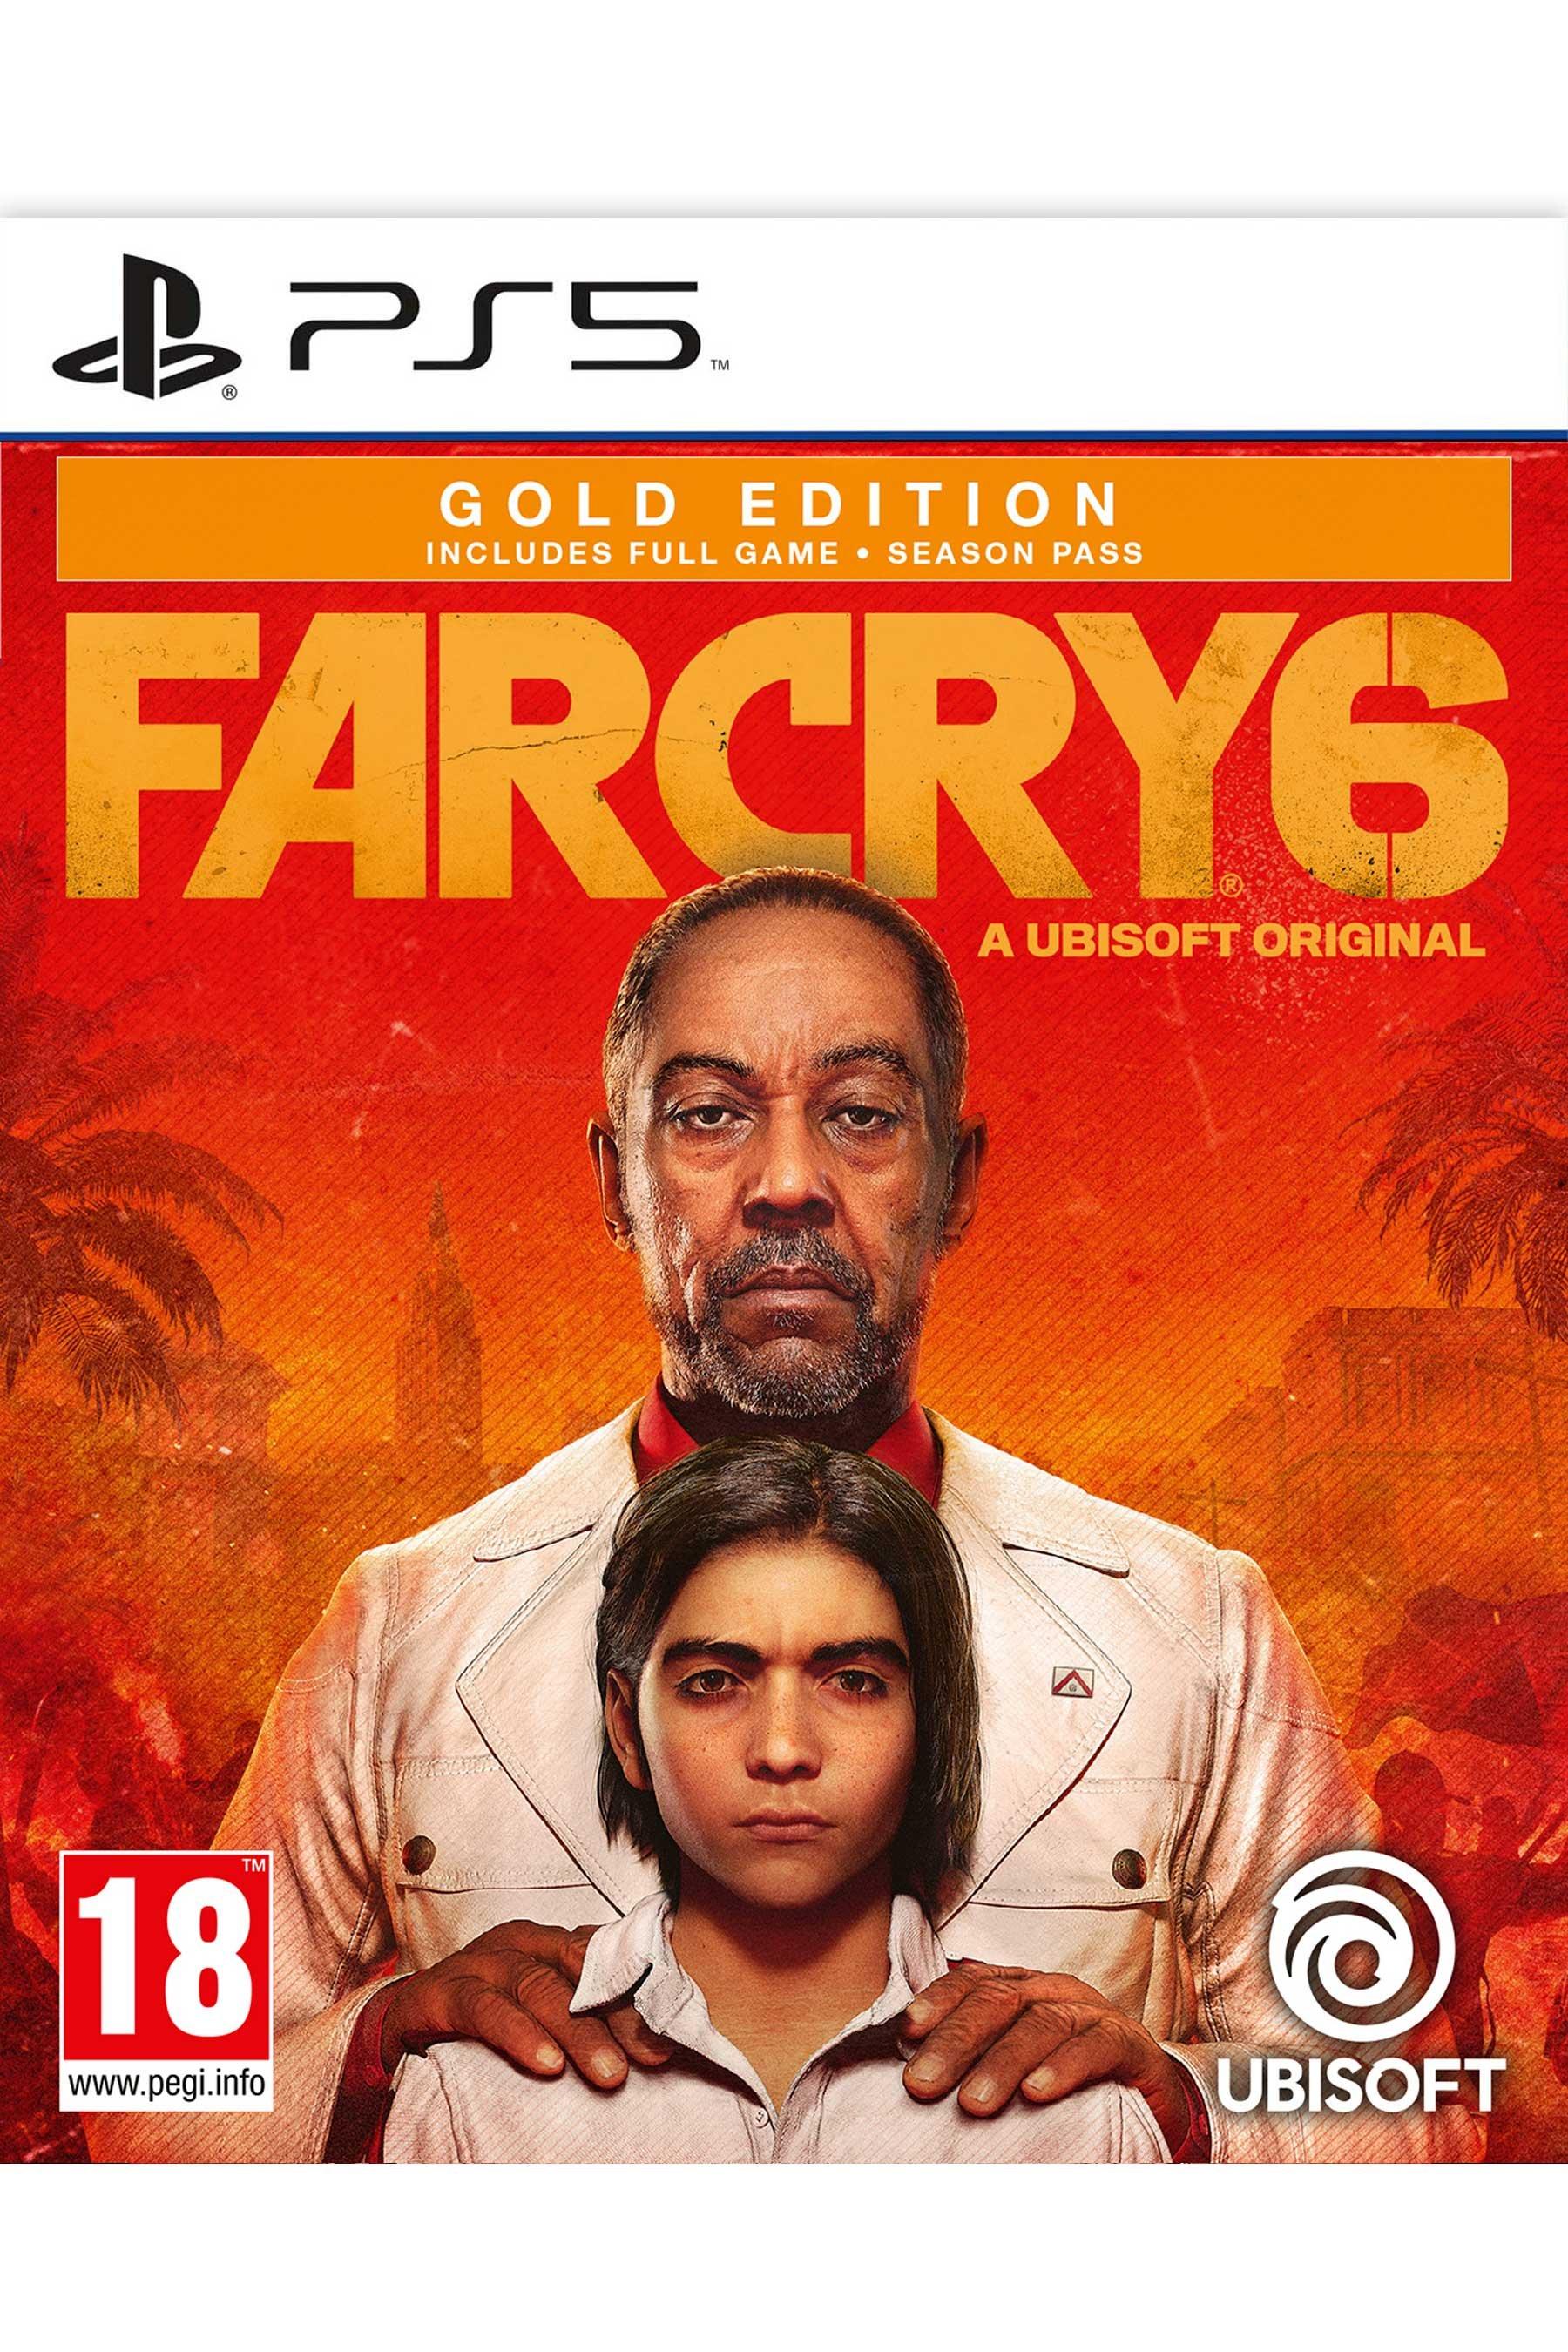 ps5: far cry 6 gold edition